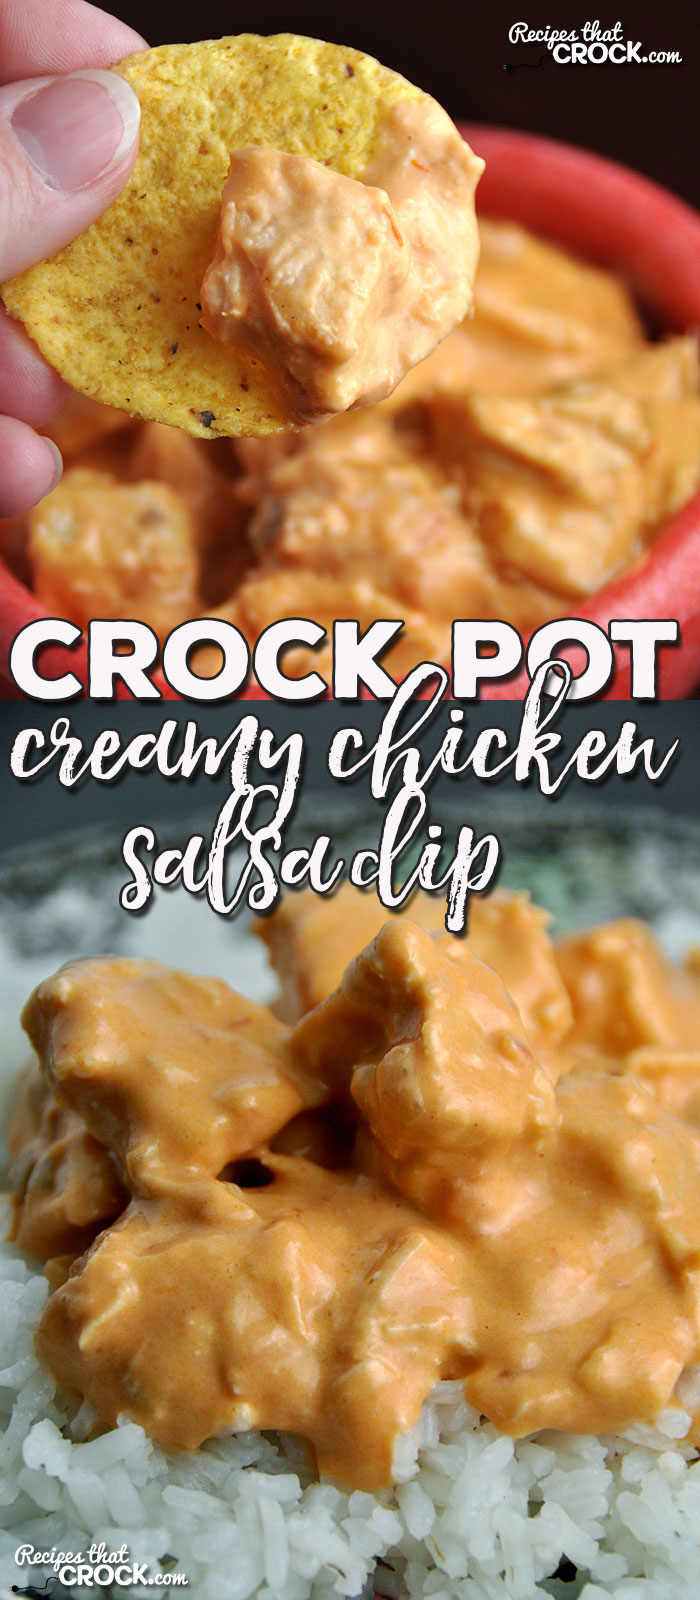 I have a treat for you! This Creamy Crock Pot Chicken Salsa Dip can be served as a dip or over rice for dinner! And better yet, it is super simple!